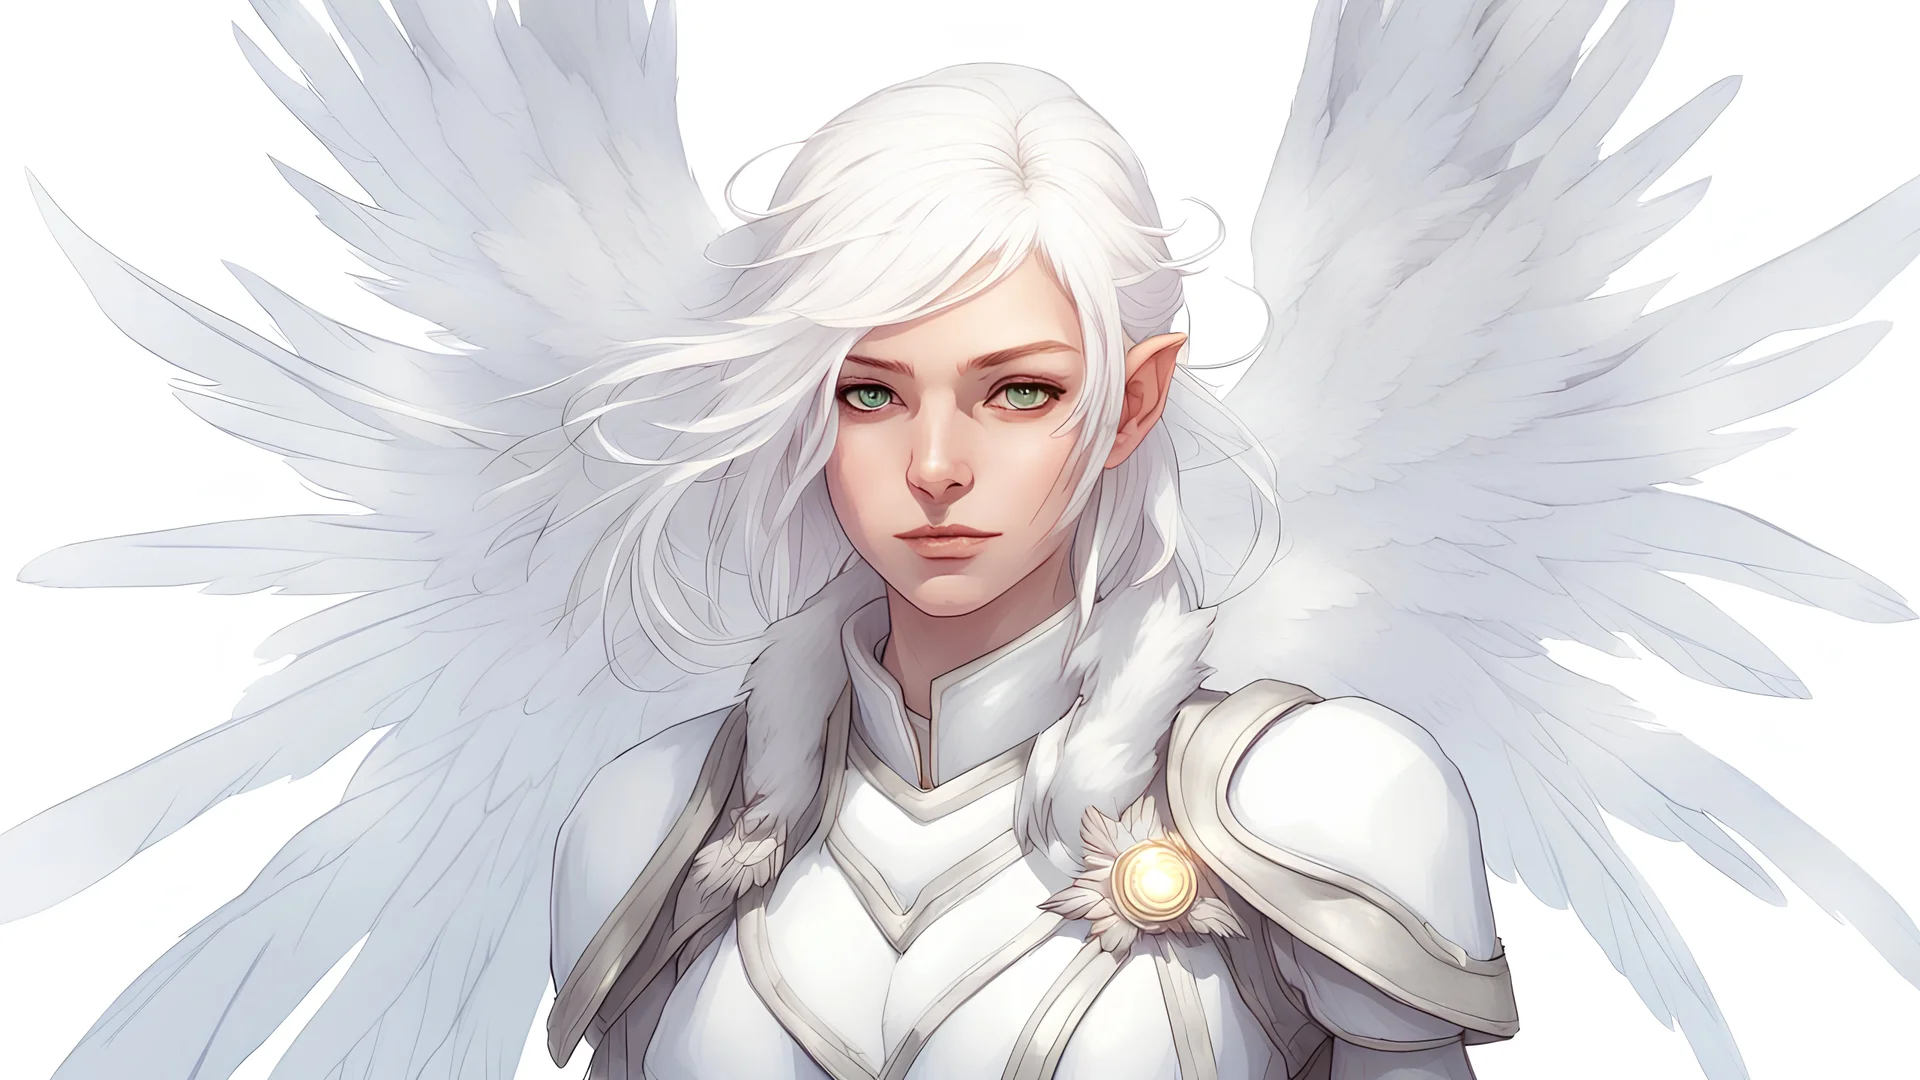 Generate a dungeons and dragons character portrait of the face of a female cleric of peace aasimar that looks like an angel with snowcolored hair. She has glowing eyes and is surrounded by holy light and has Angel wings. She is an halfling and looks young and beautiful. She seems Kind but there is an dark urge inside of her. She is depressed and is a bit crazy